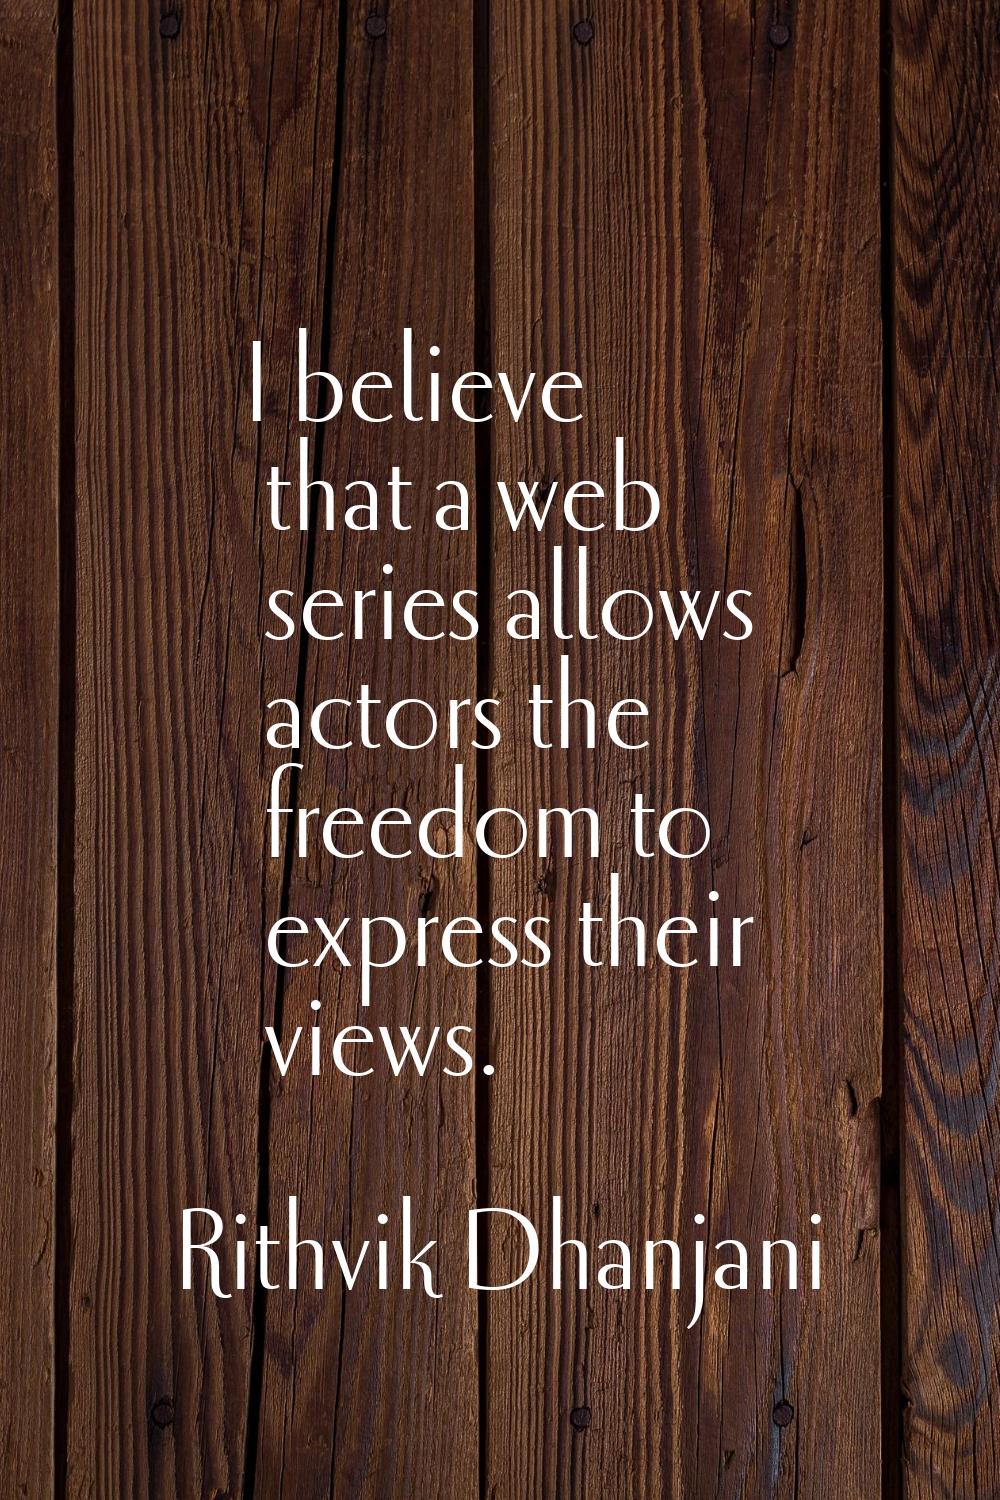 I believe that a web series allows actors the freedom to express their views.